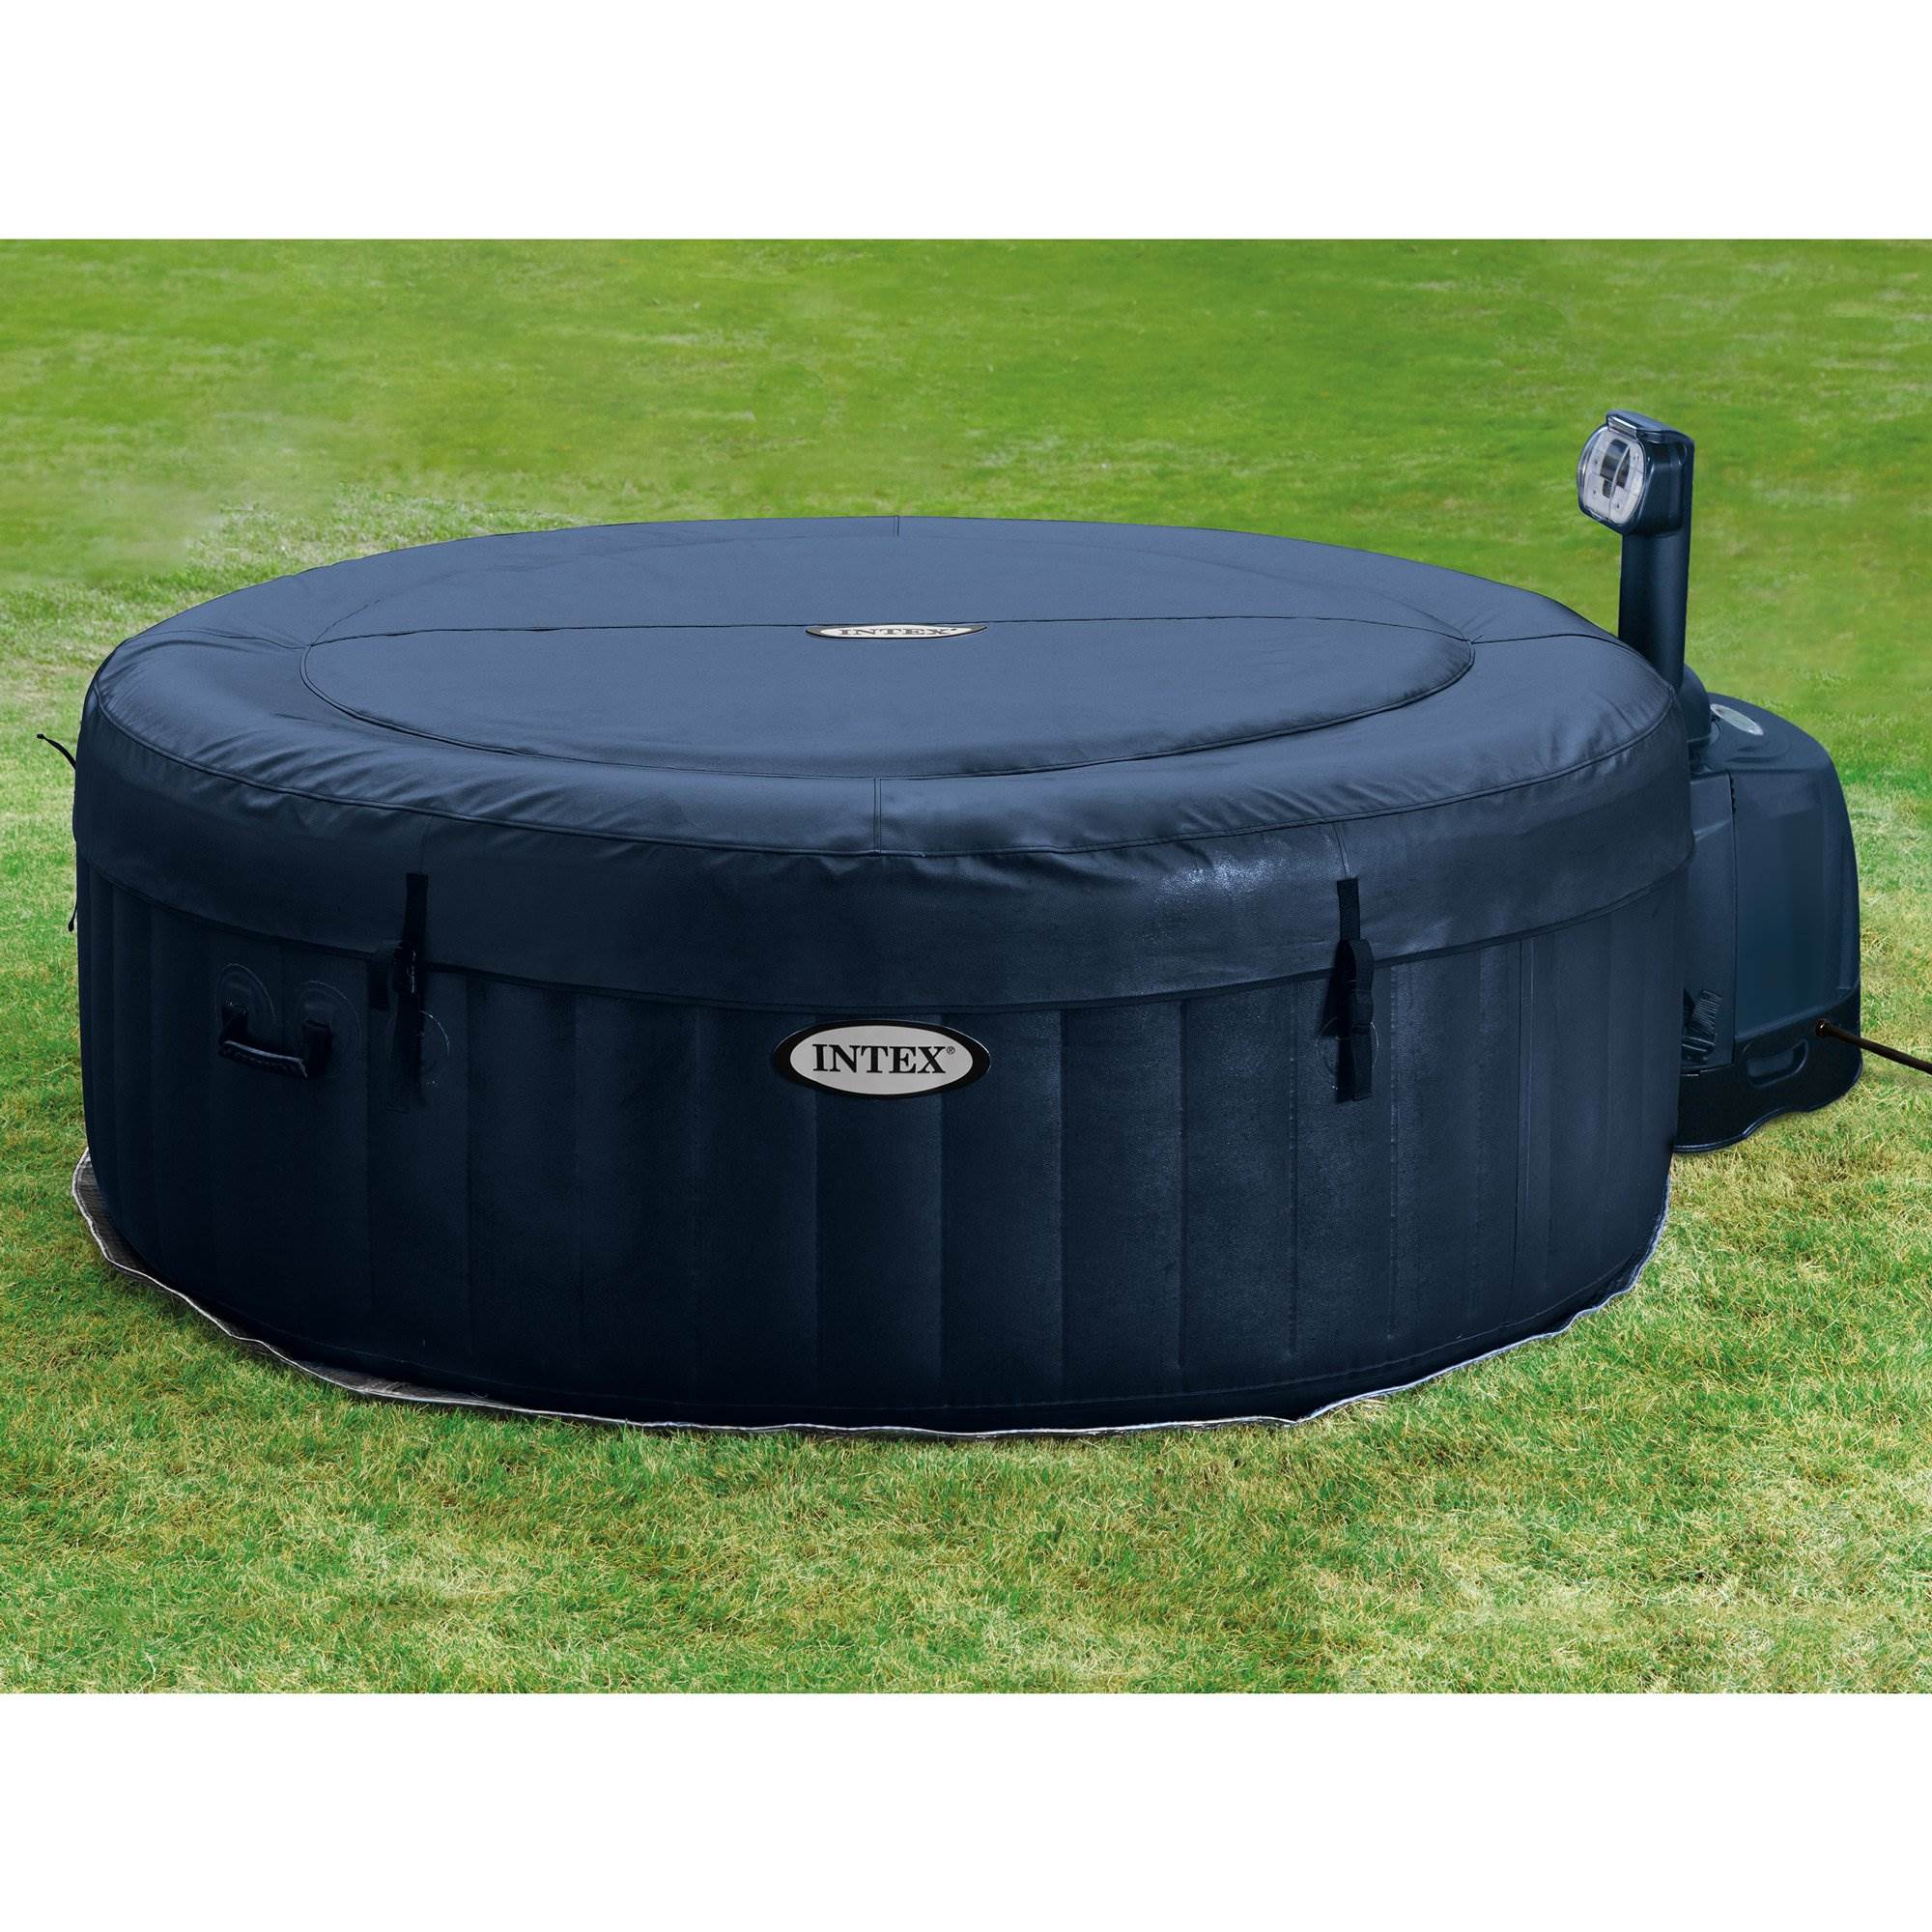 Intex 4-Person 140-Jet Round Inflatable Hot Tub at Lowes.com